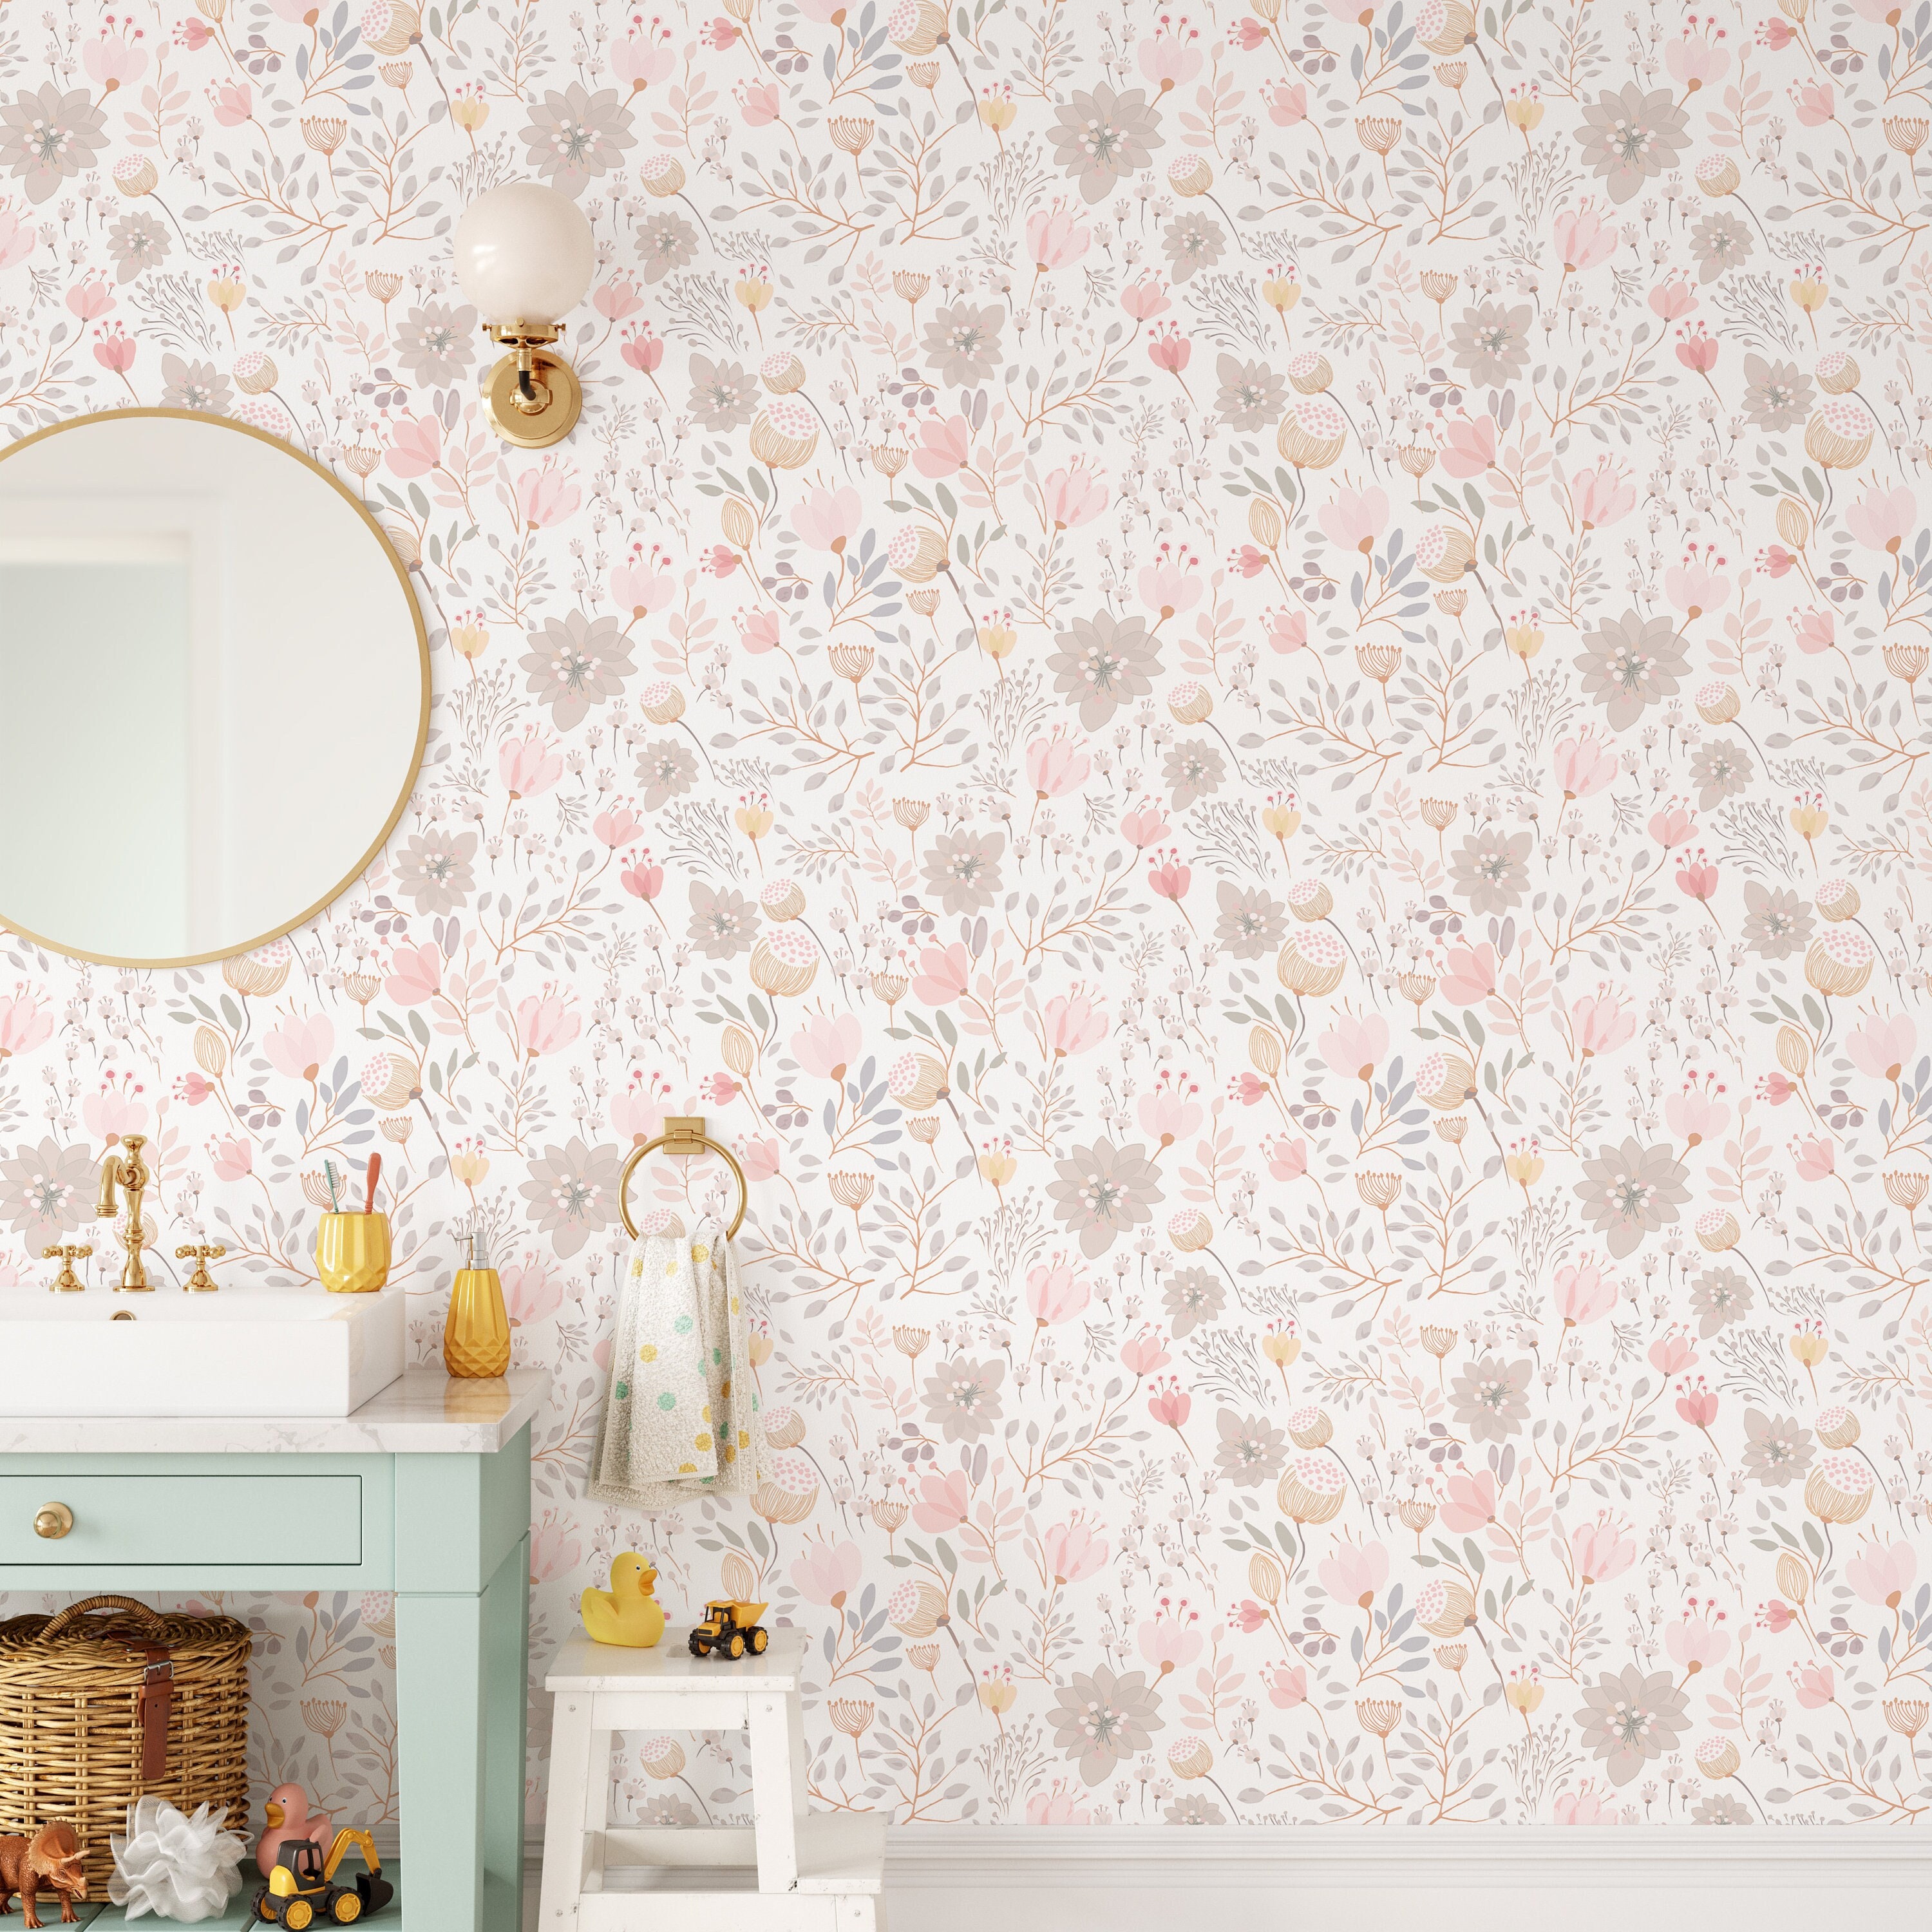 QnySpace Peel and Stick Wallpaper, Boho Floral Wallpaper for